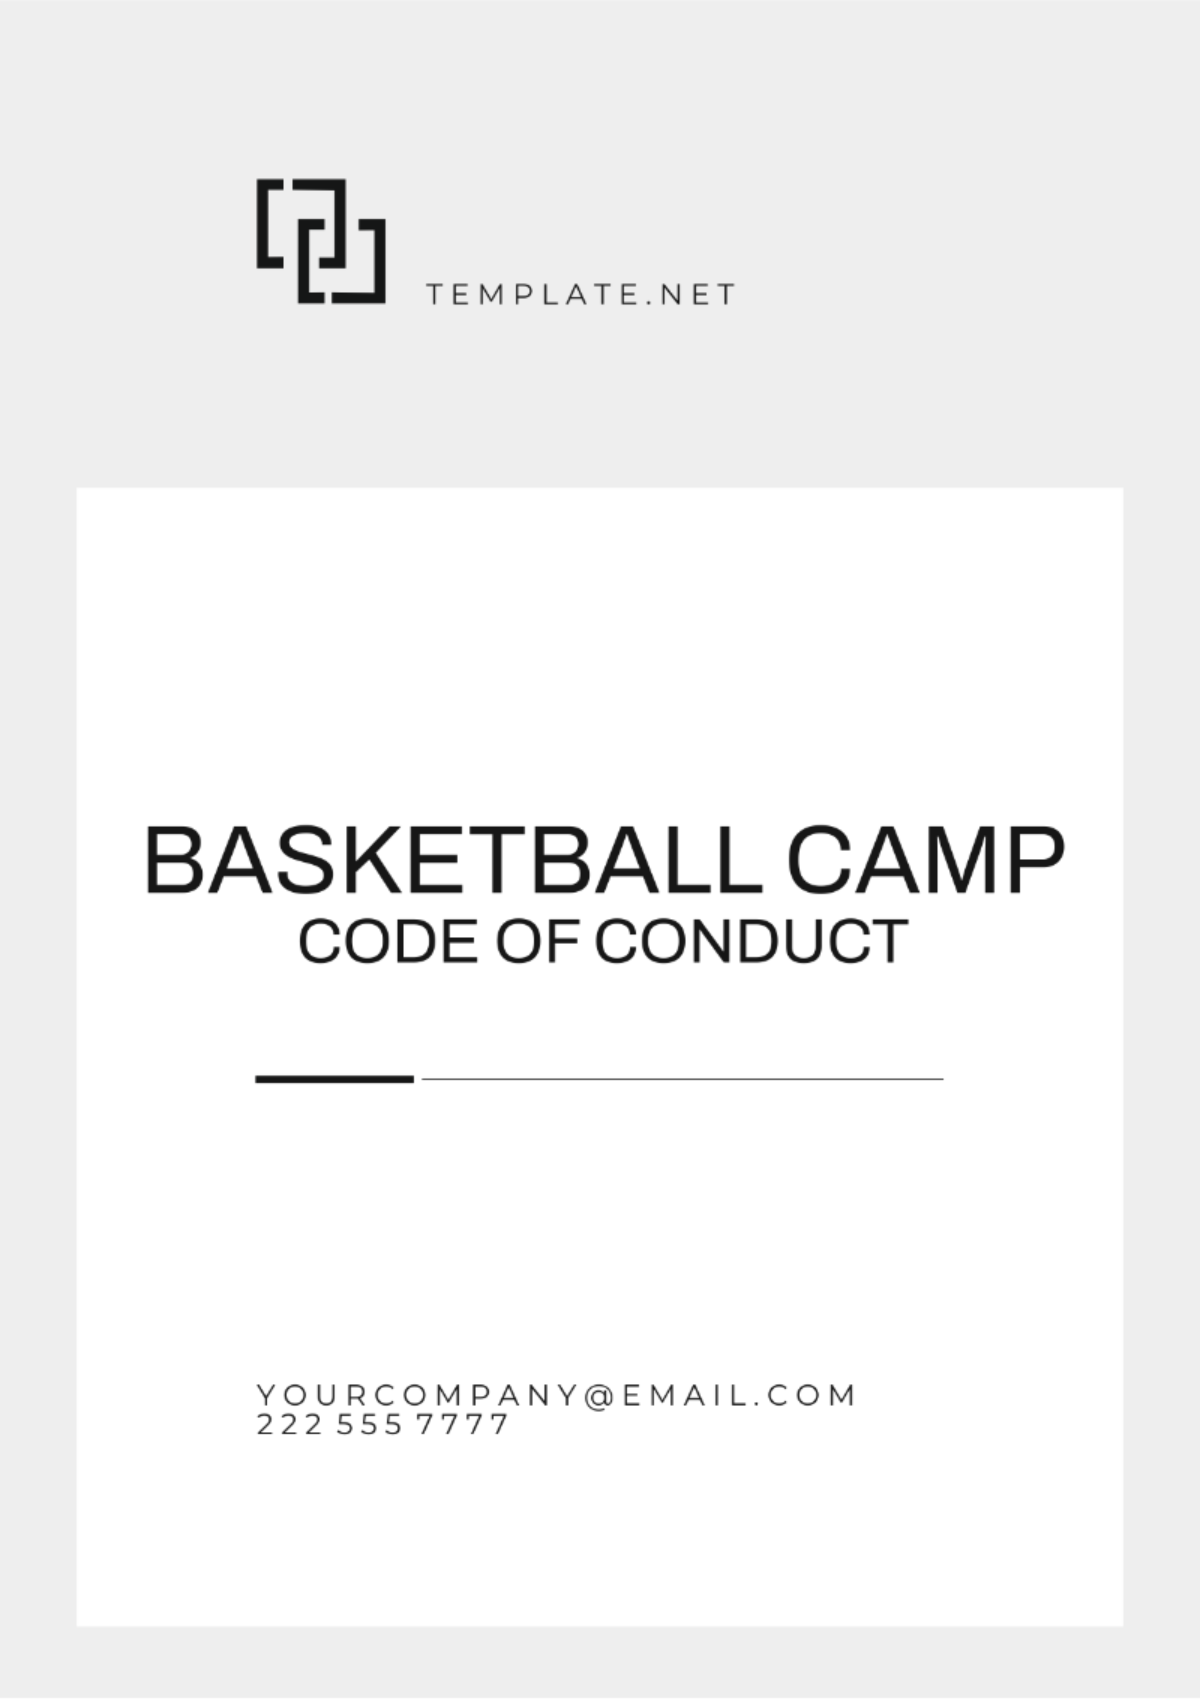 Free Basketball Camp Code of Conduct Template